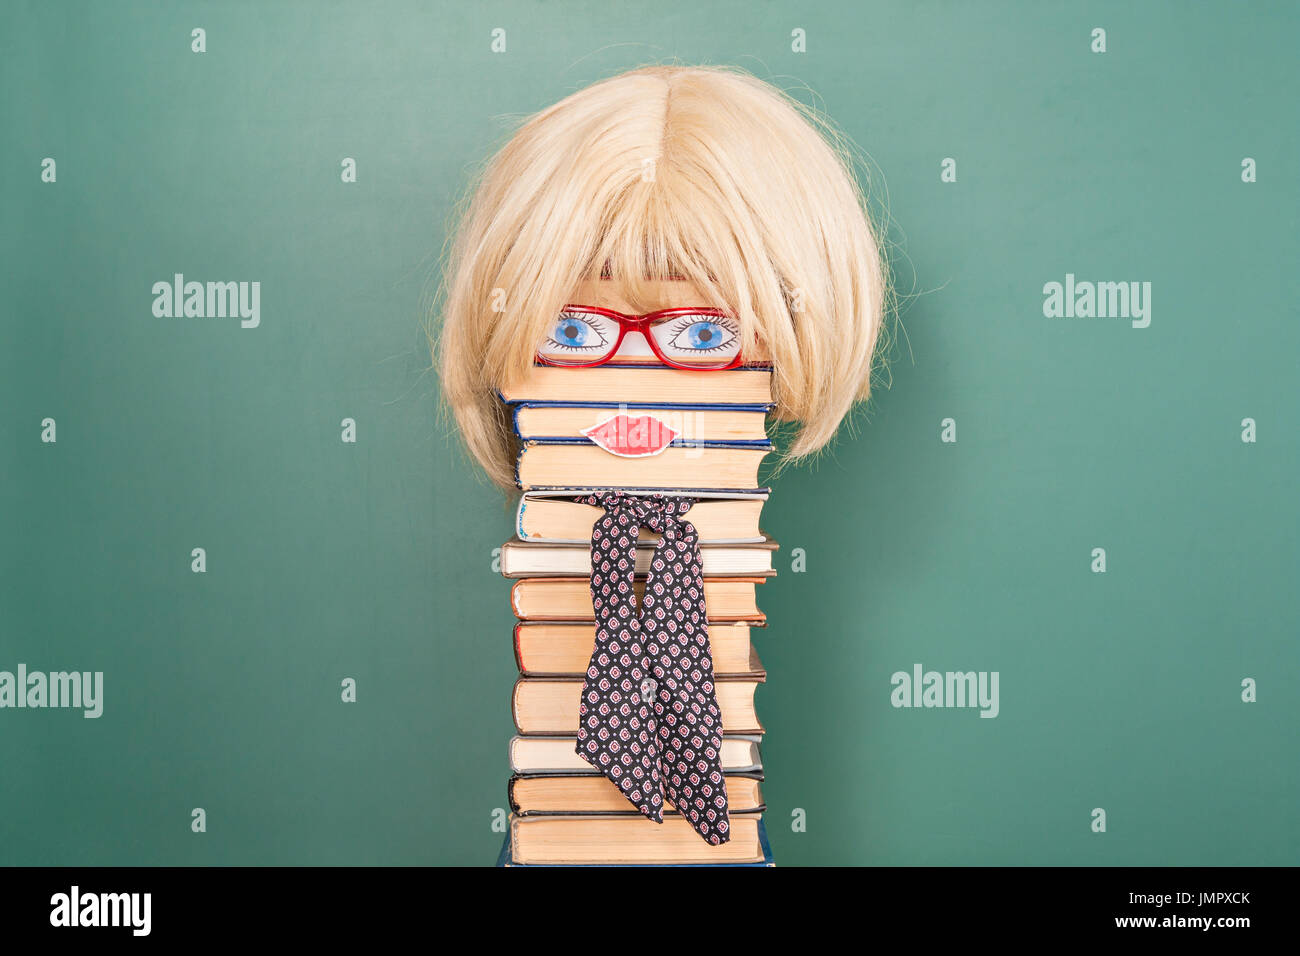 Funny education idea, woman teacher in front of blackboard with copy space Stock Photo